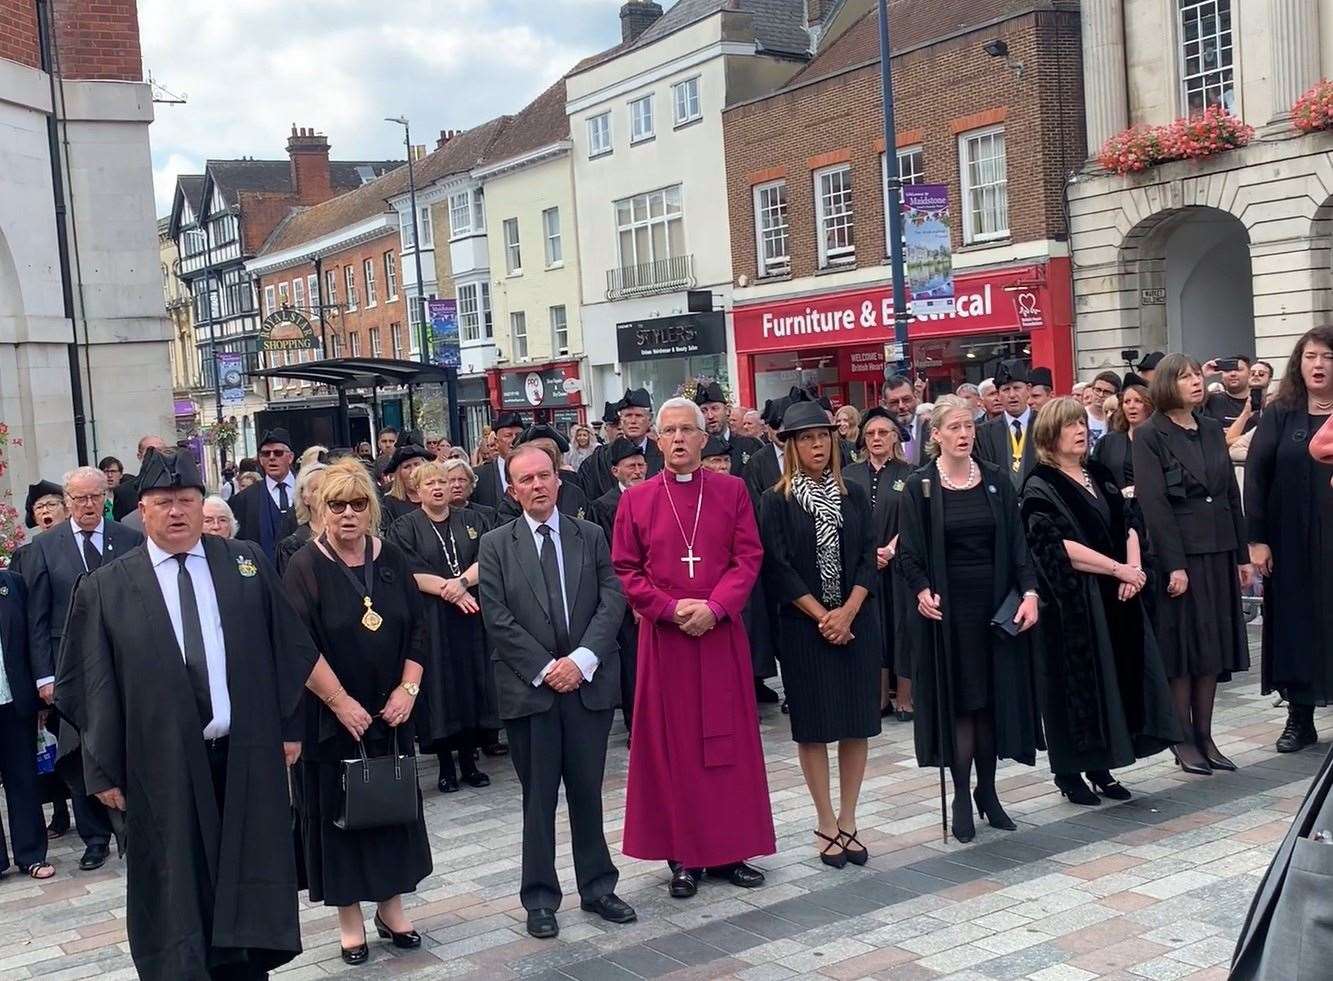 A proclamation of the new King was held in Maidstone following the death of Queen Elizabeth II